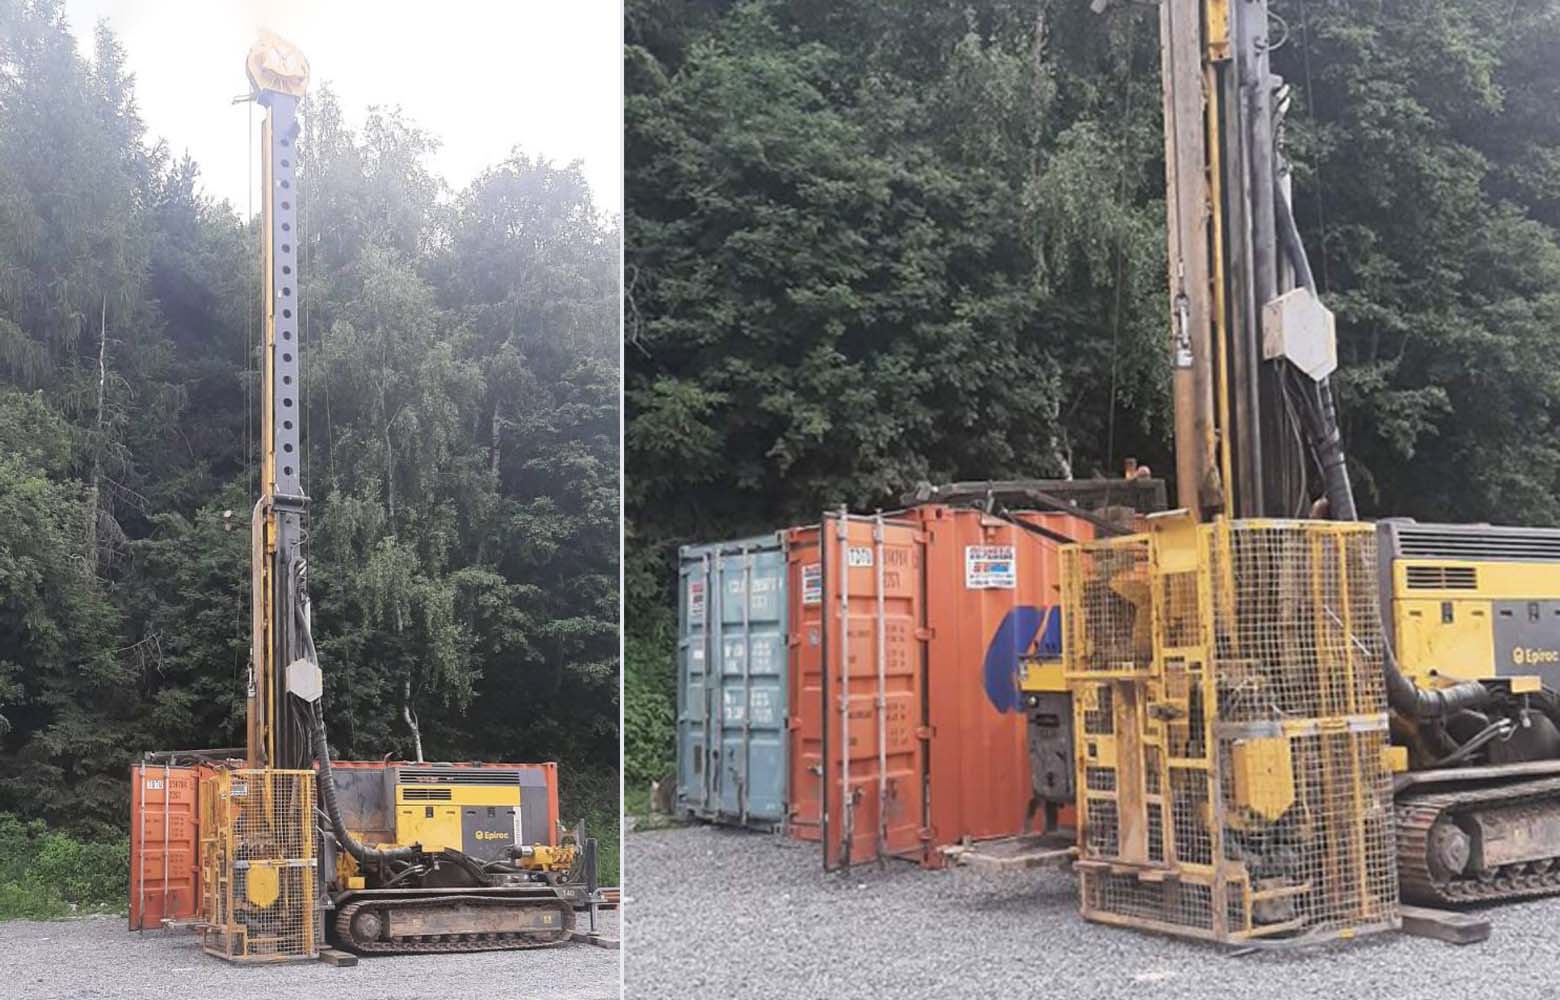 The second rig is now installed at Rabenwald, Austria